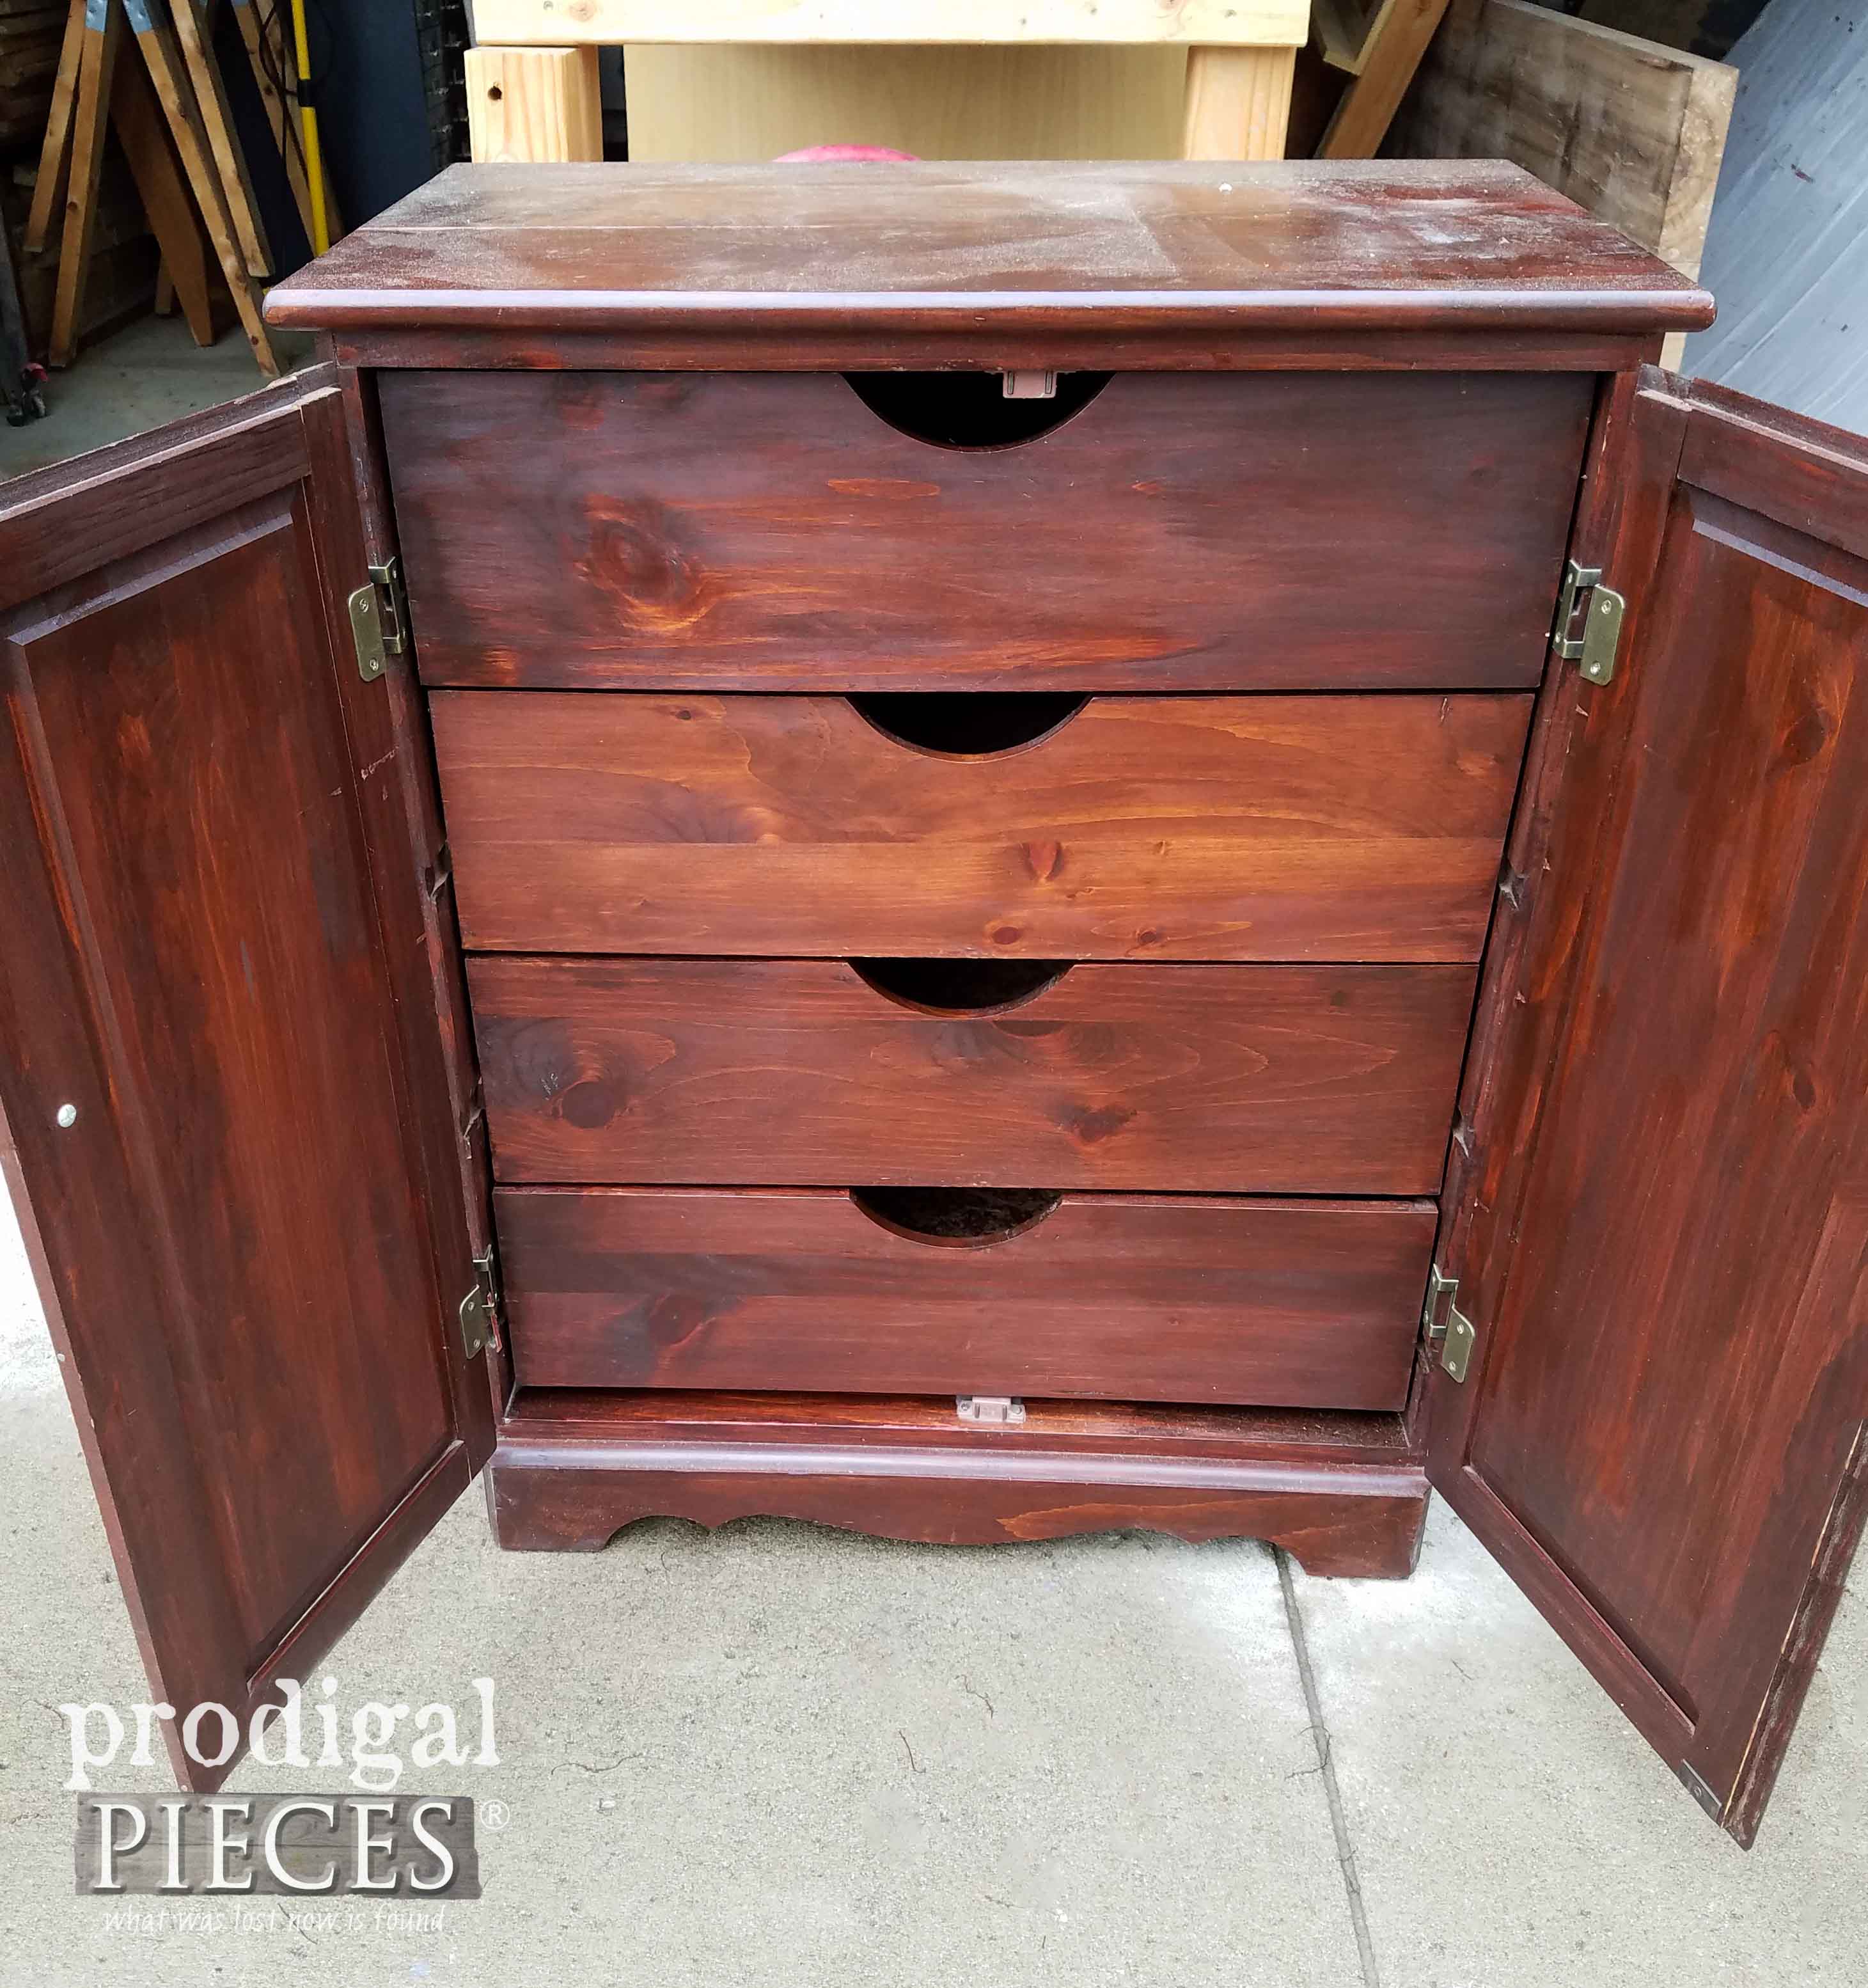 Inside of Wooden Cabinet for Makeover by Prodigal Pieces | prodigalpieces.com